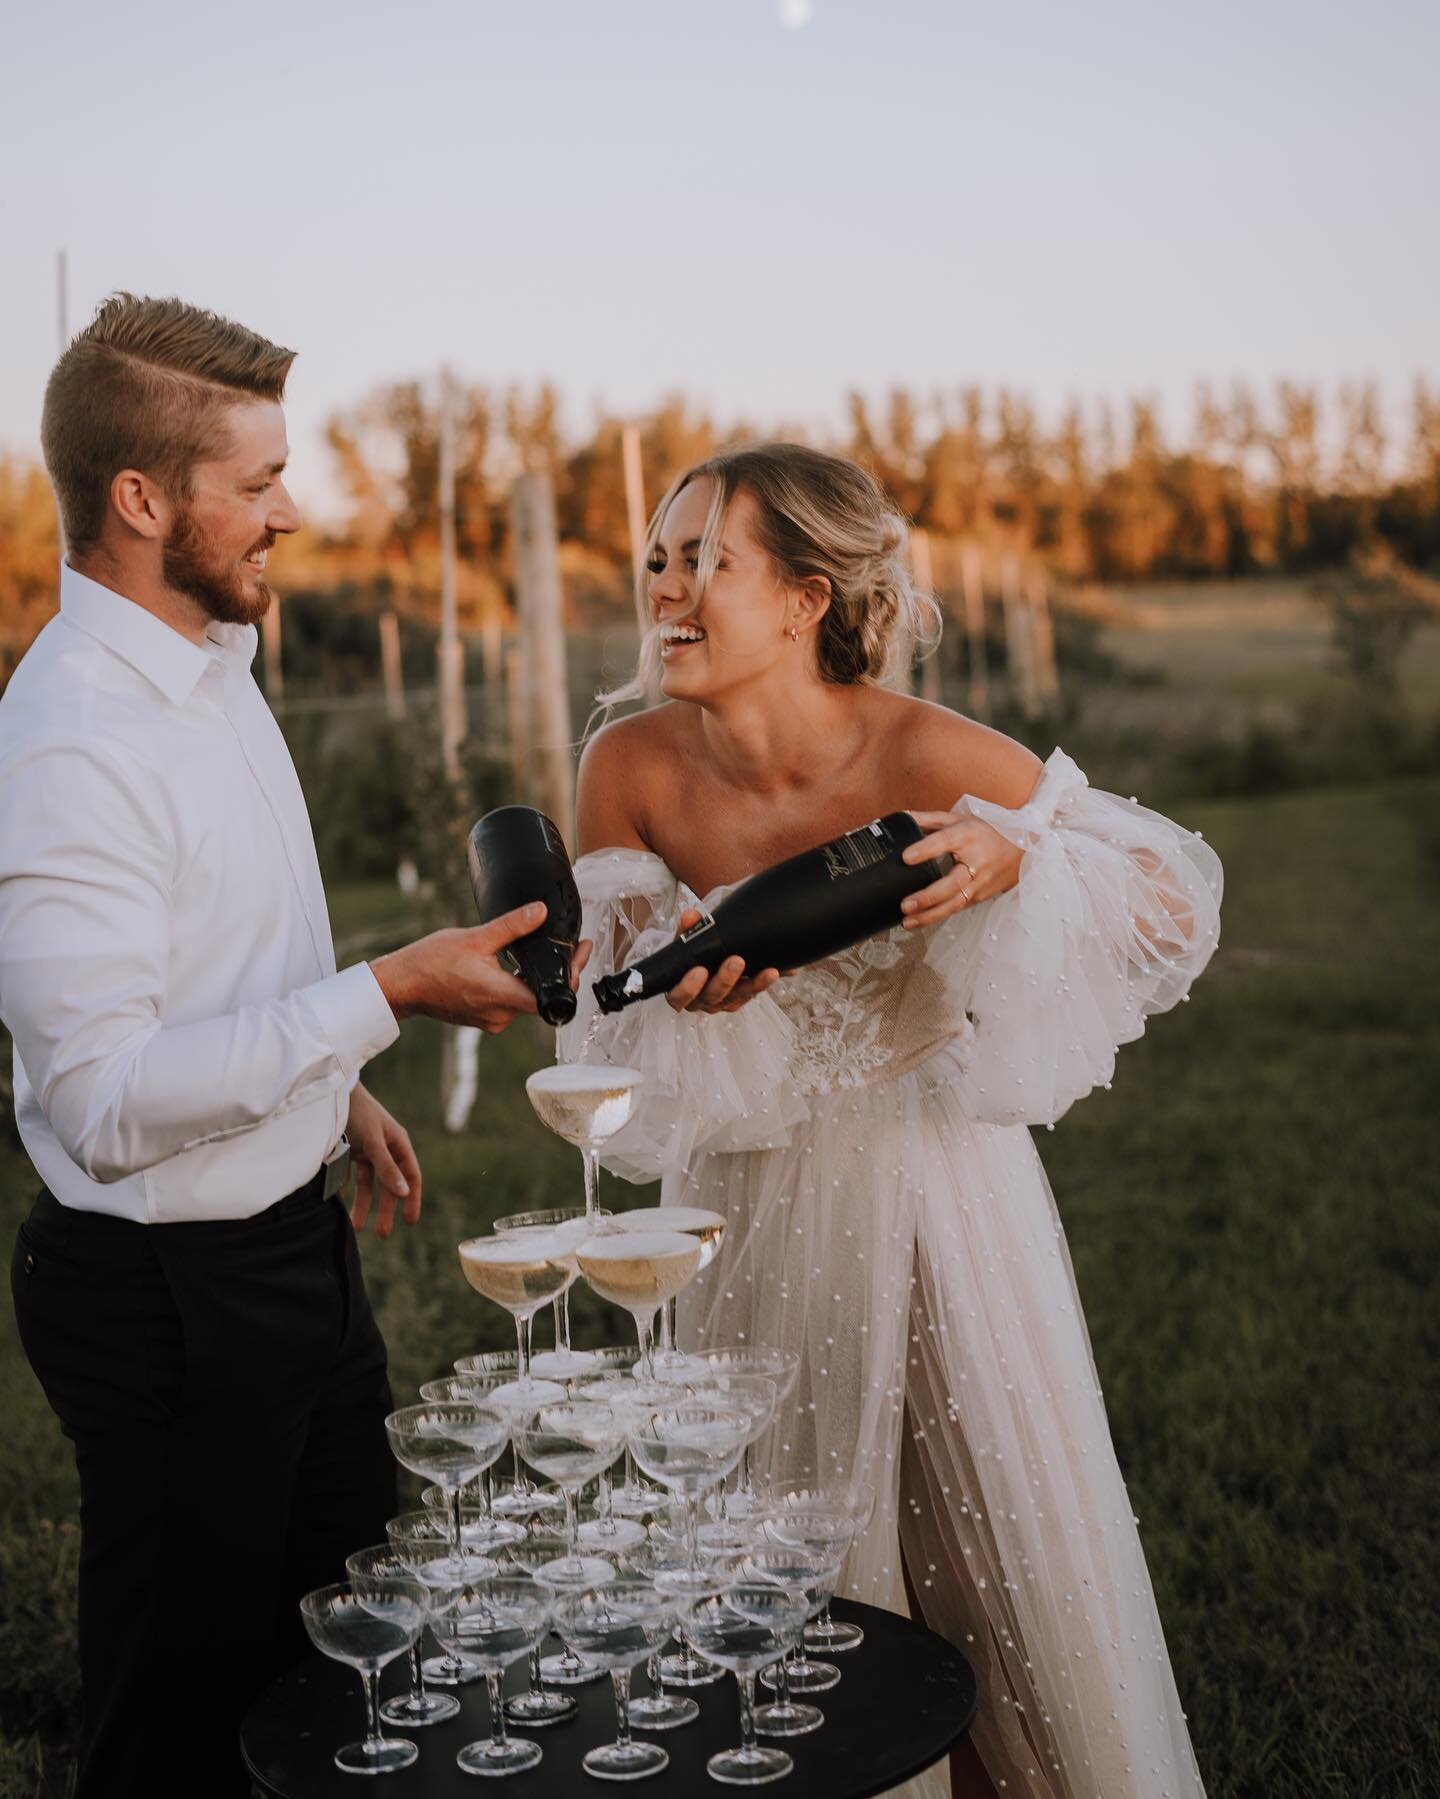 I hope the champagne tower trend is here to stay because it is just too cool.

Taken while photographing August: the workshop, with @chelseaarensphoto

Model : @kalla_emily 
Venue: @thegleneventvenue
Makeup: @makeupbymaryina
Videographer: @lovelaurav